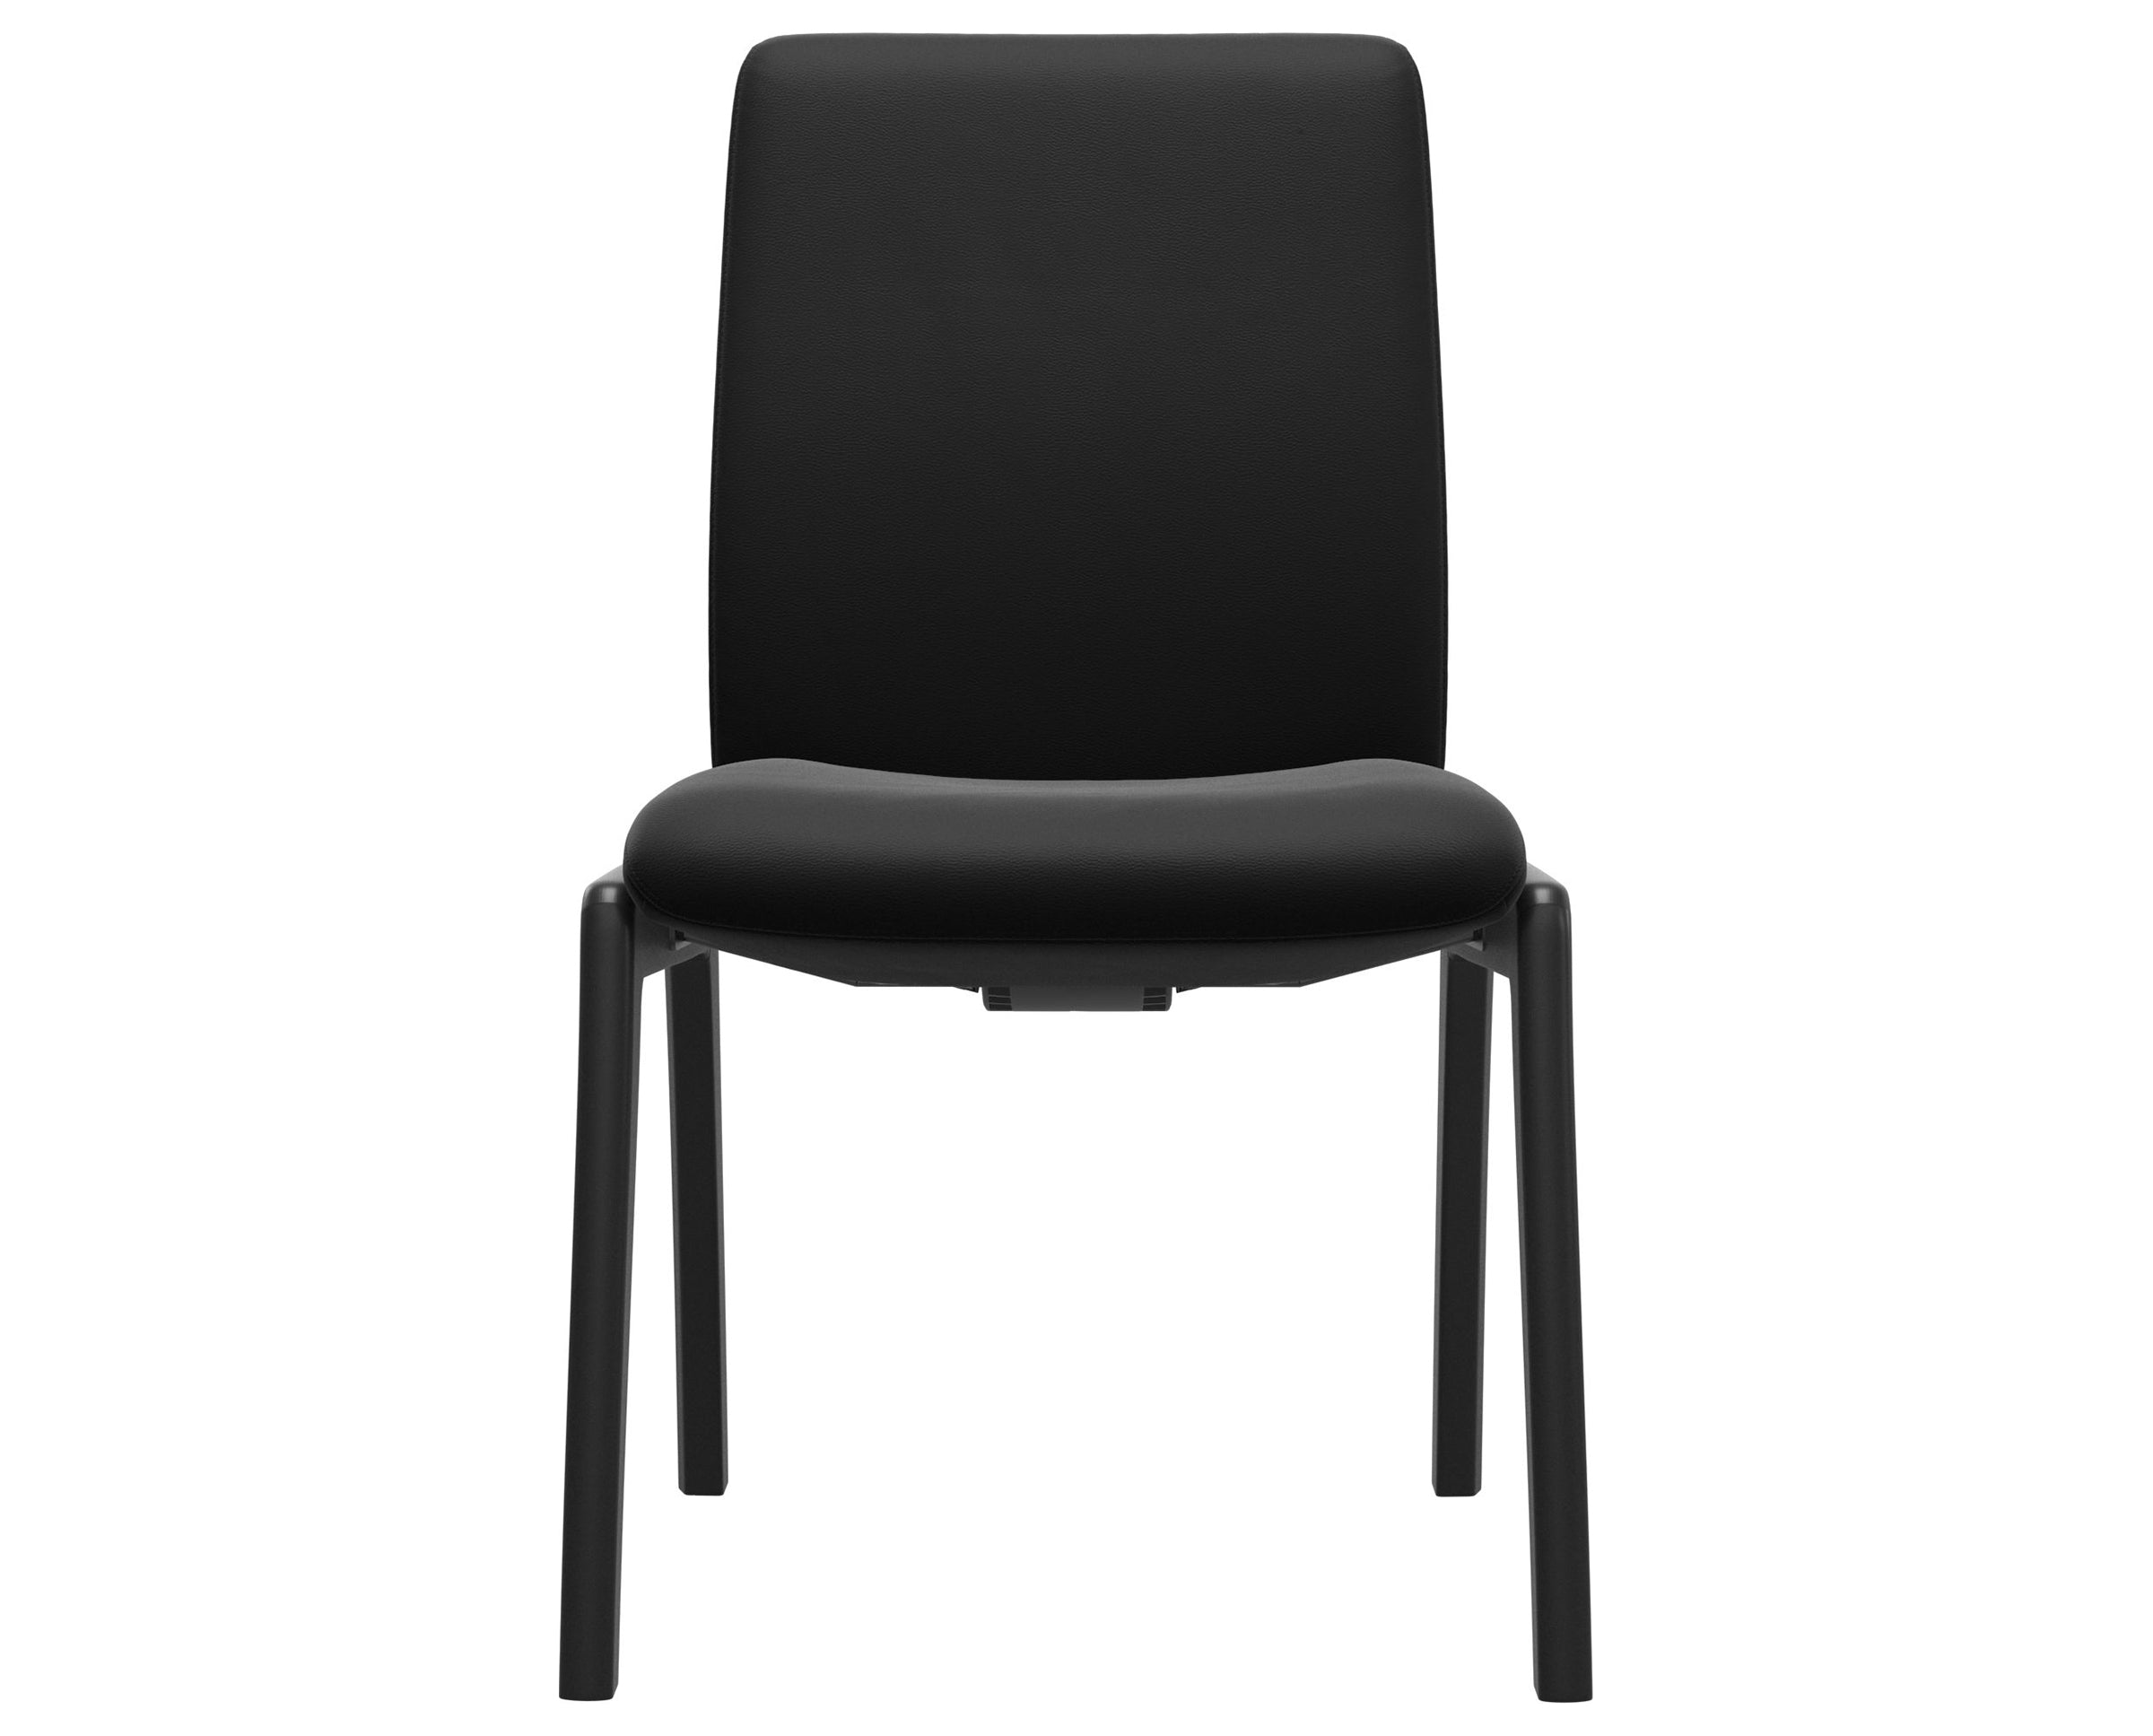 Paloma Leather Black and Black Base | Stressless Laurel Low Back D100 Dining Chair | Valley Ridge Furniture